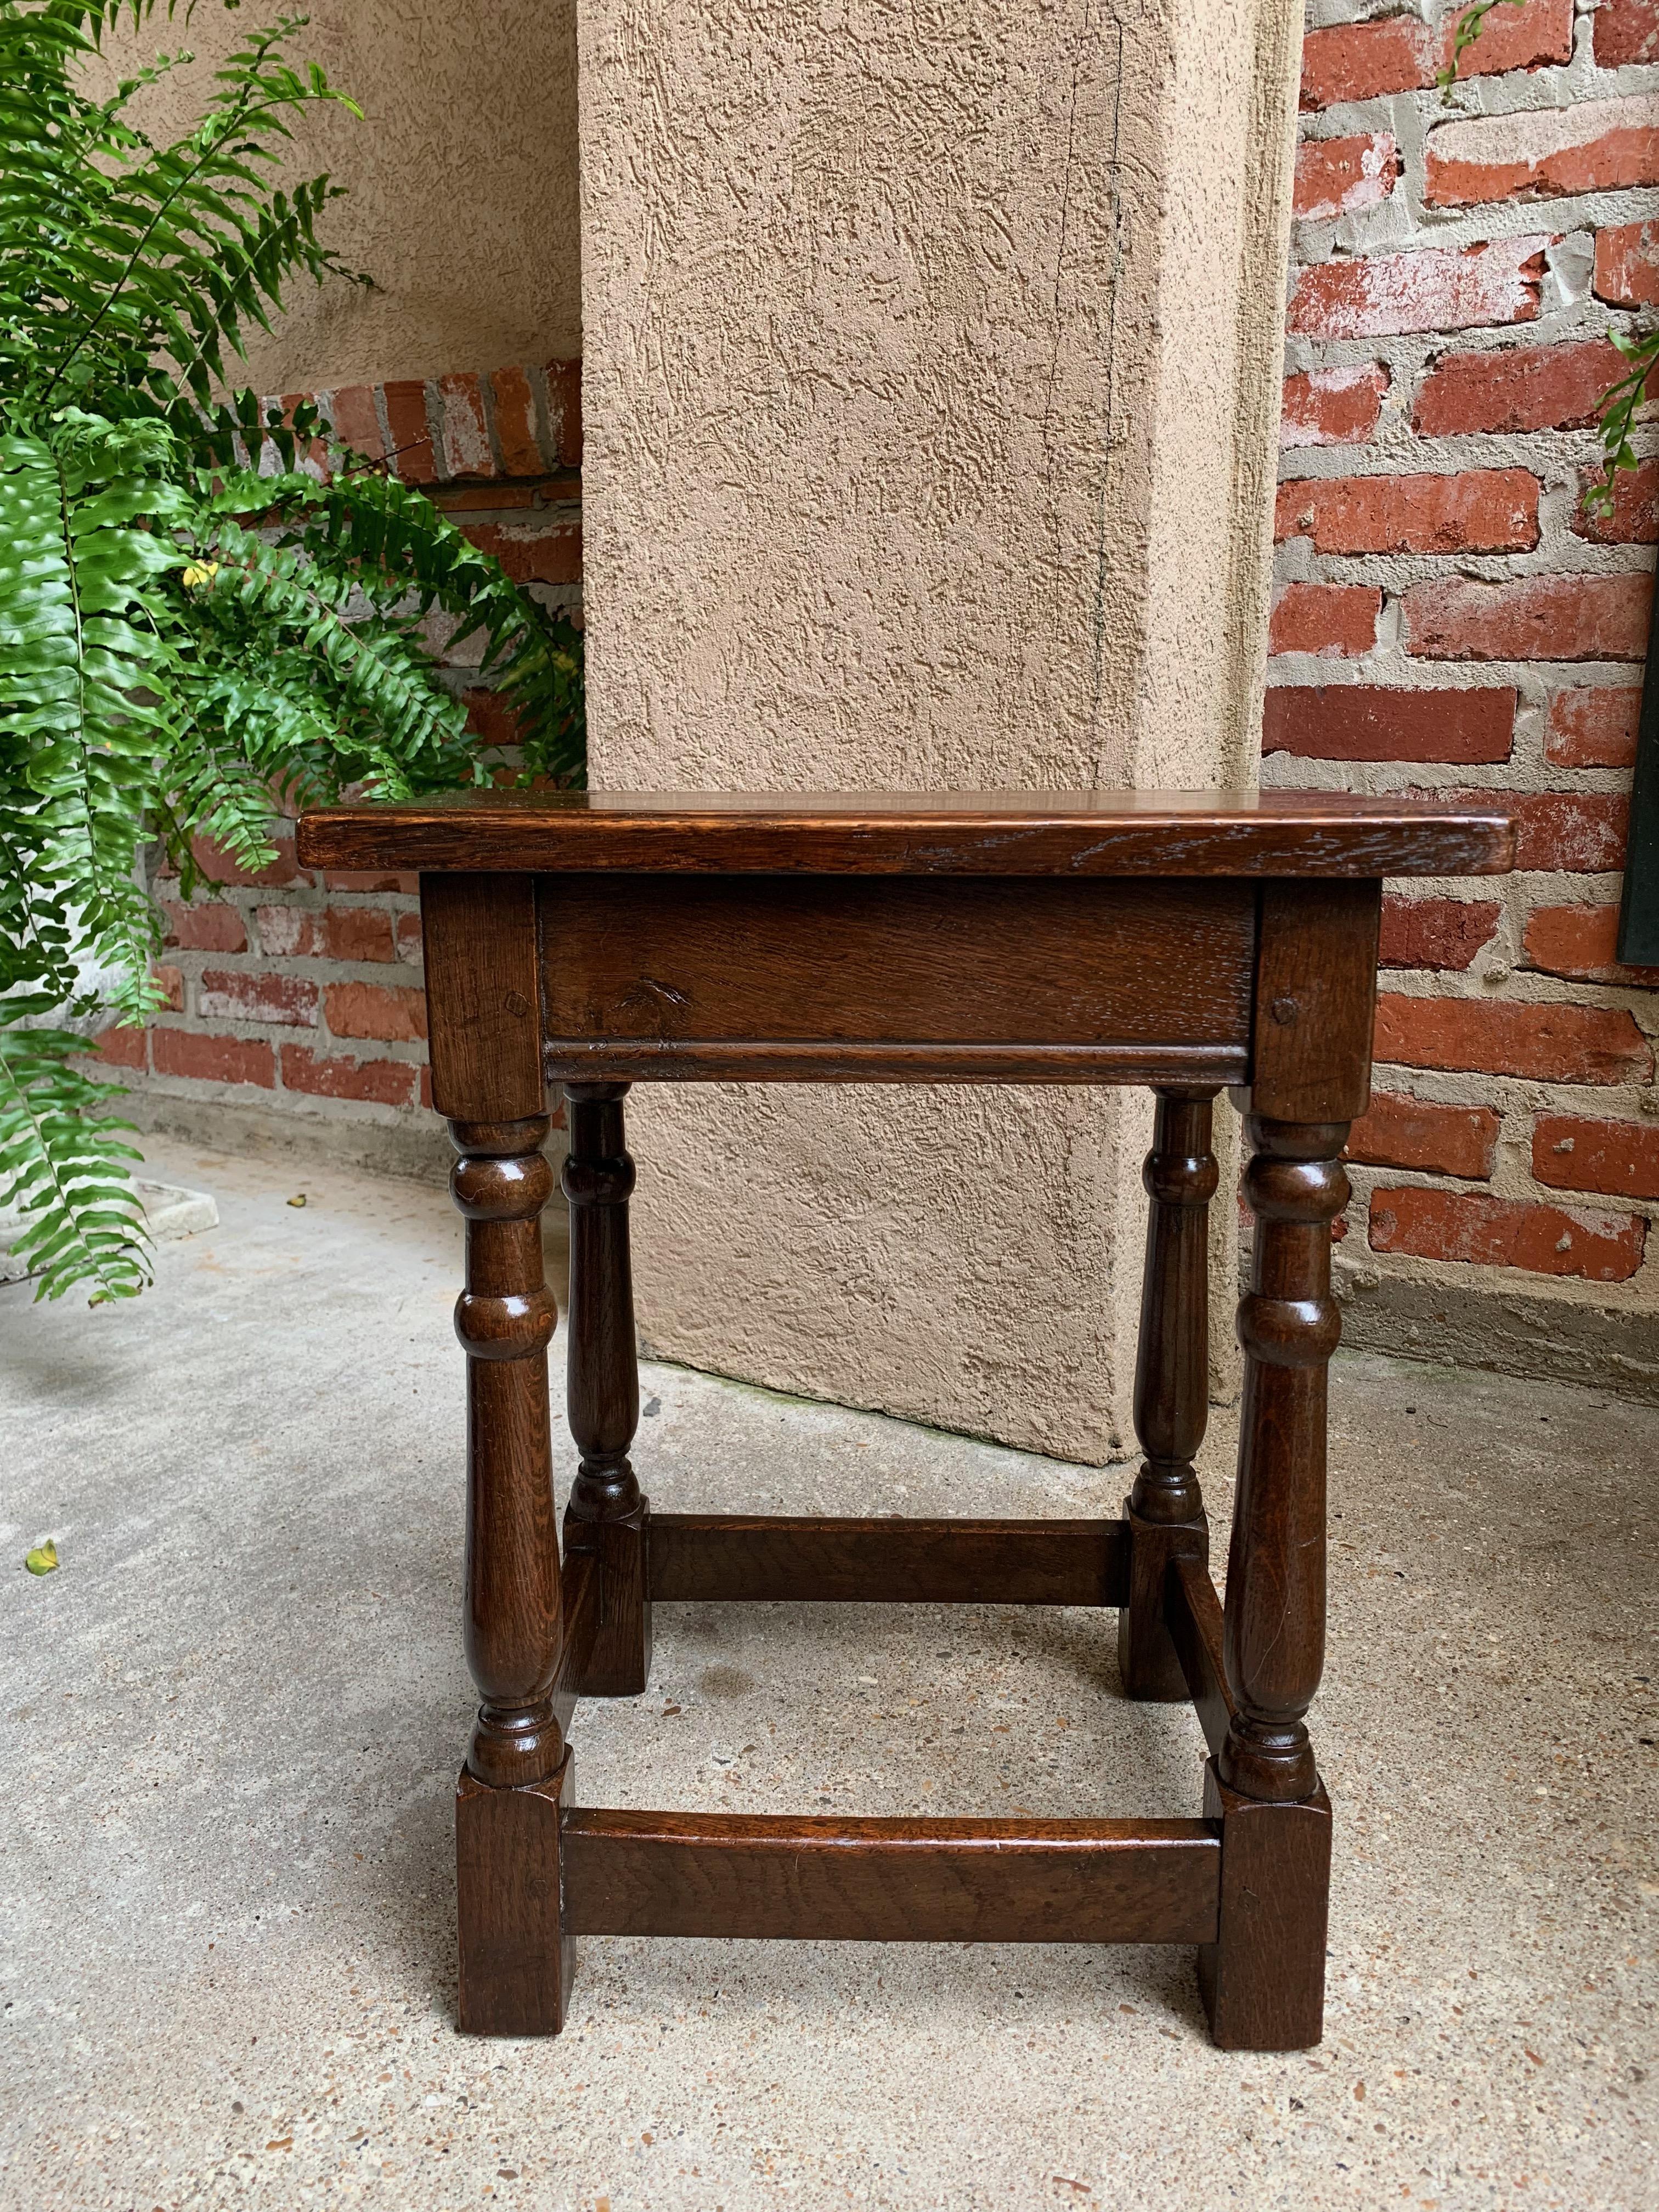 Hand-Carved Antique English Carved Tiger Oak Joint Stool Bench Table Splayed Leg c1900